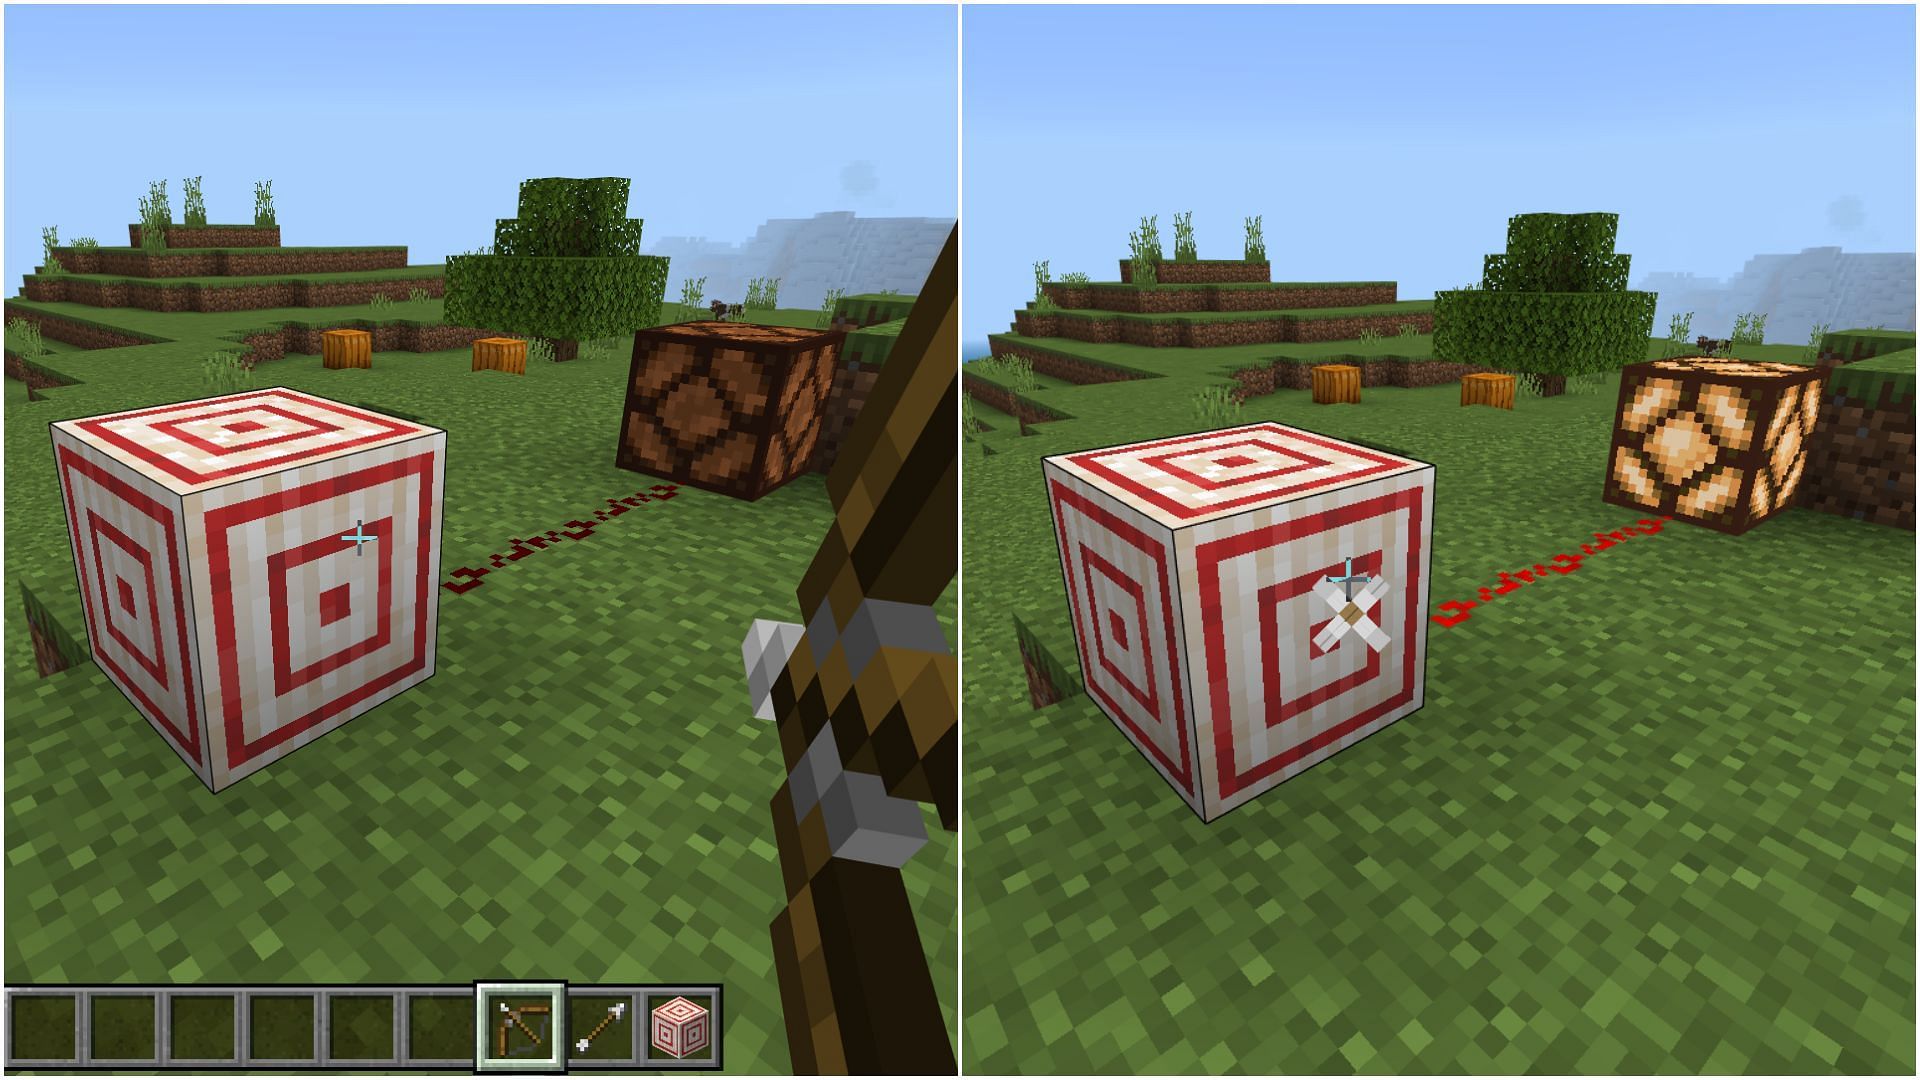 Target blocks emit a redstone signal when they are hit by any projectile (Image via Mojang Studios)